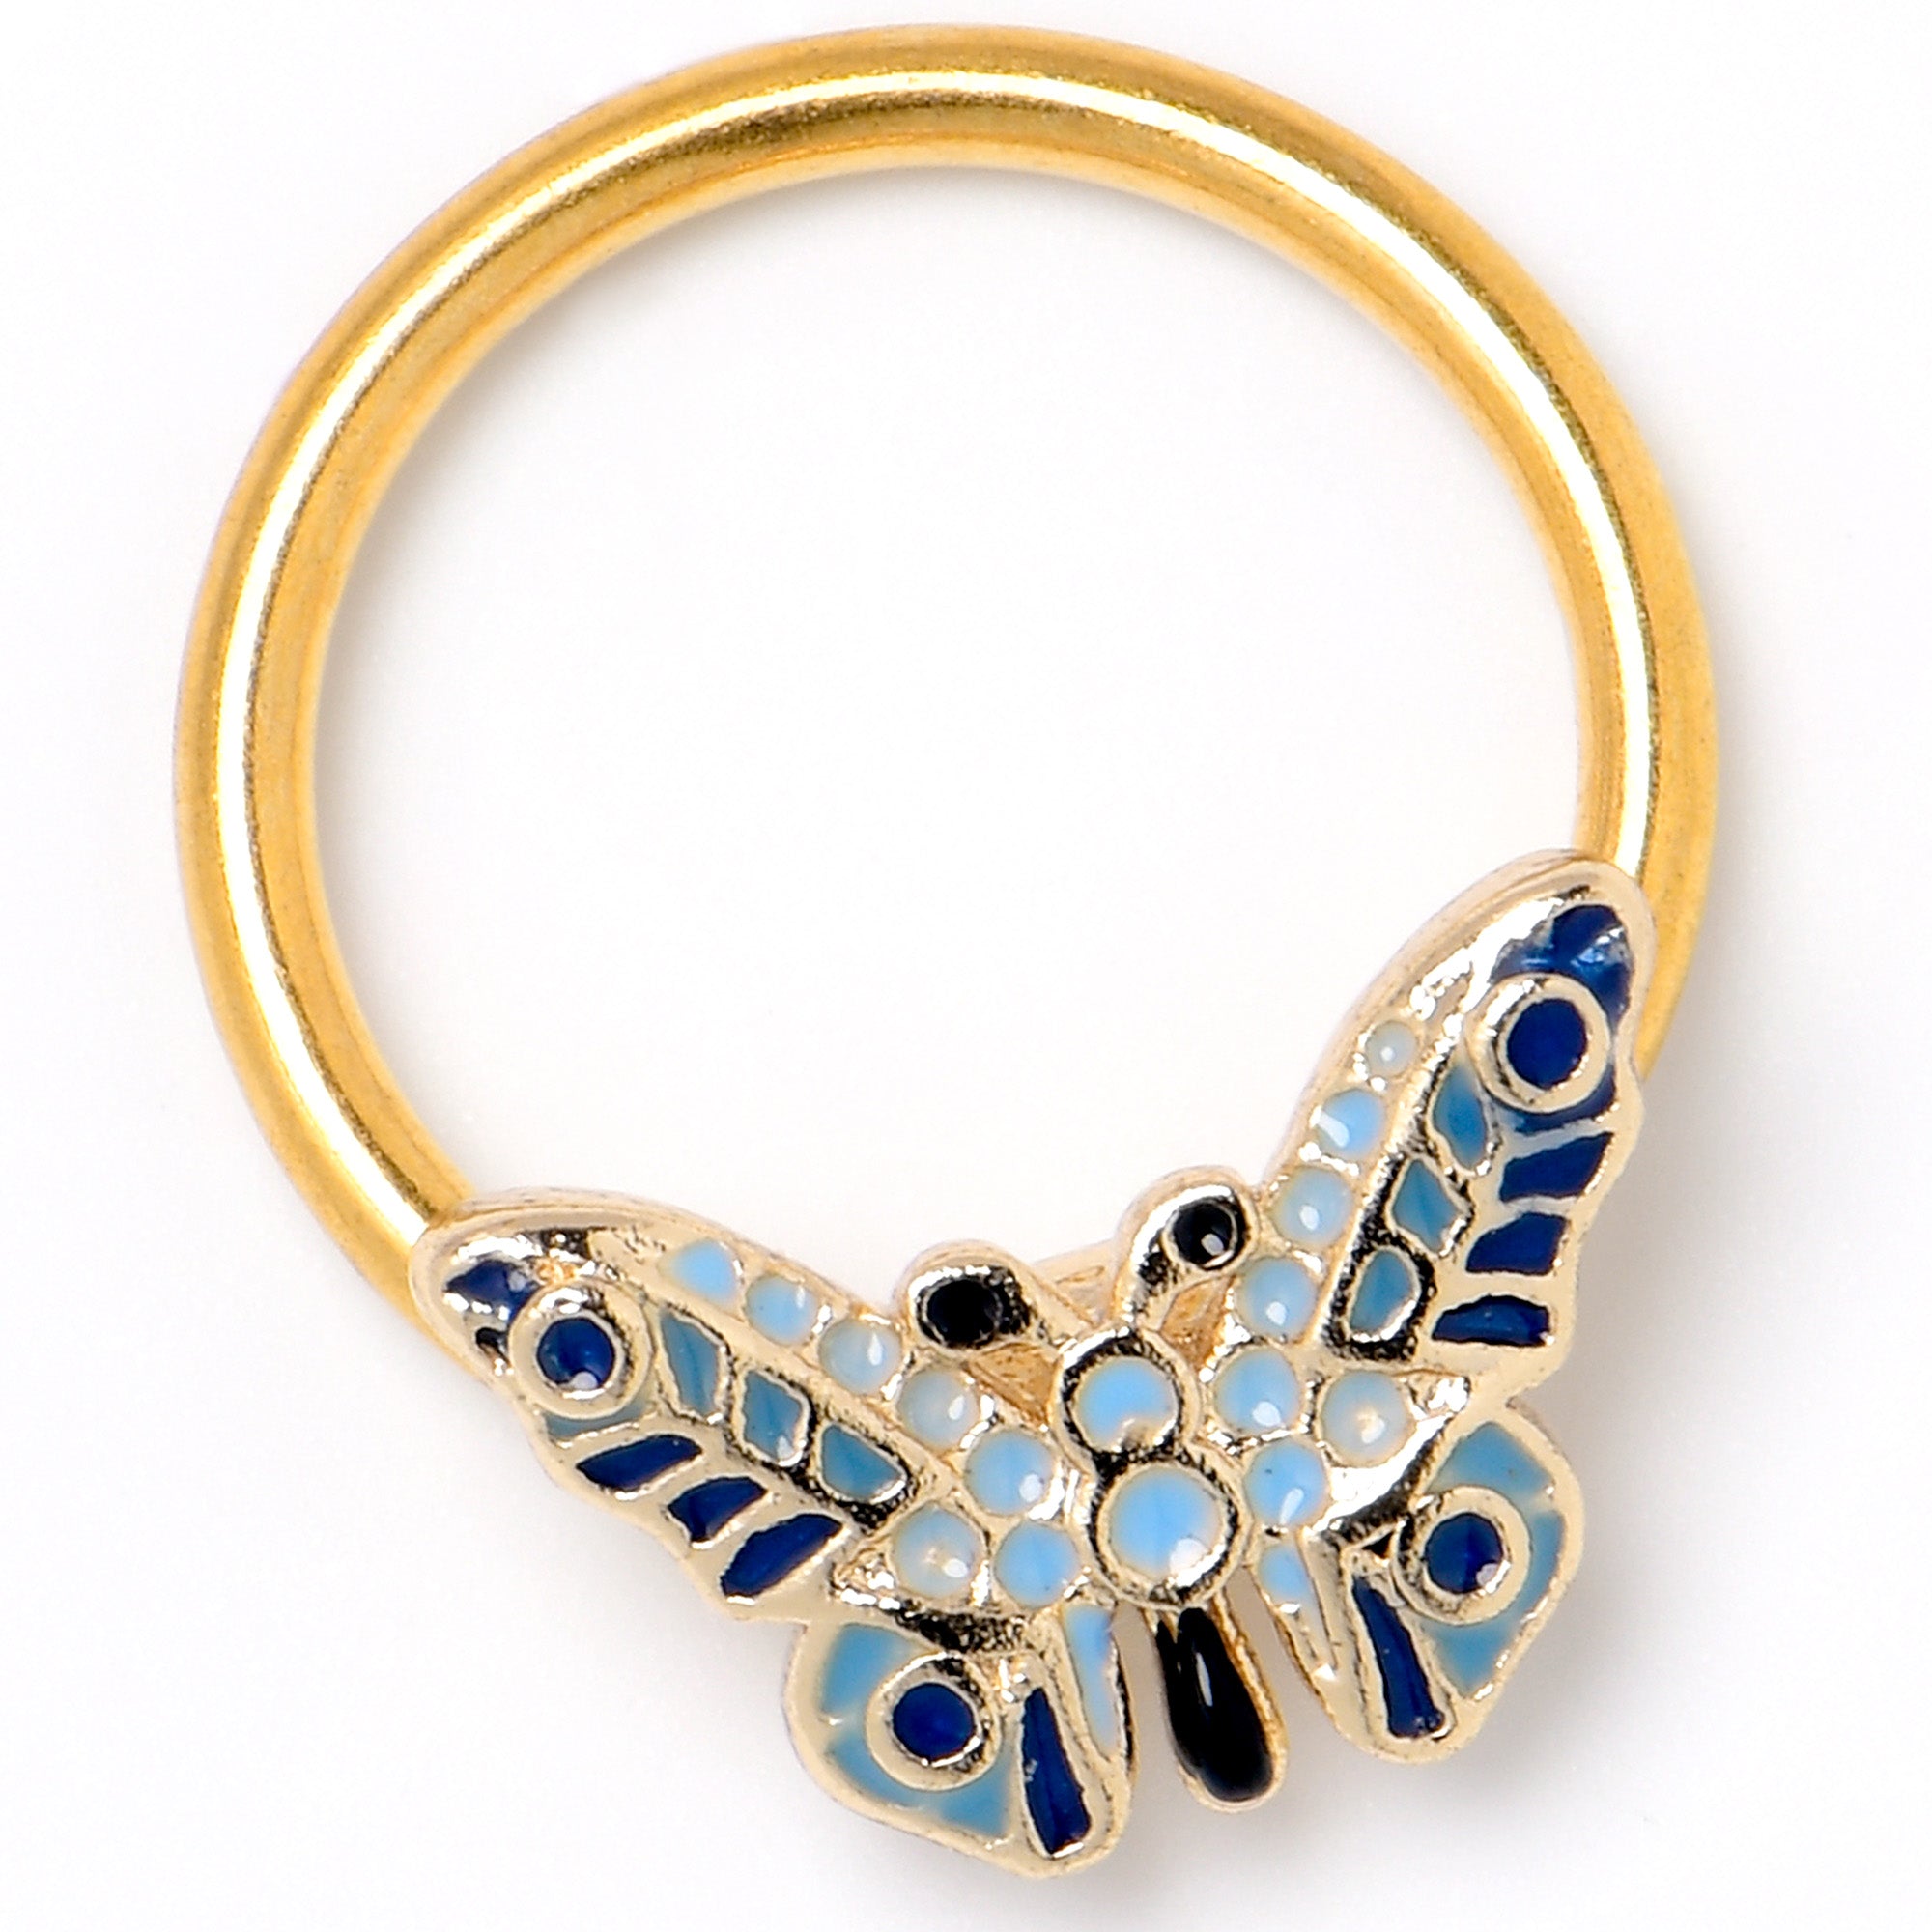 16 Gauge 3/8 Gold Tone Evening Butterfly BCR Captive Ring